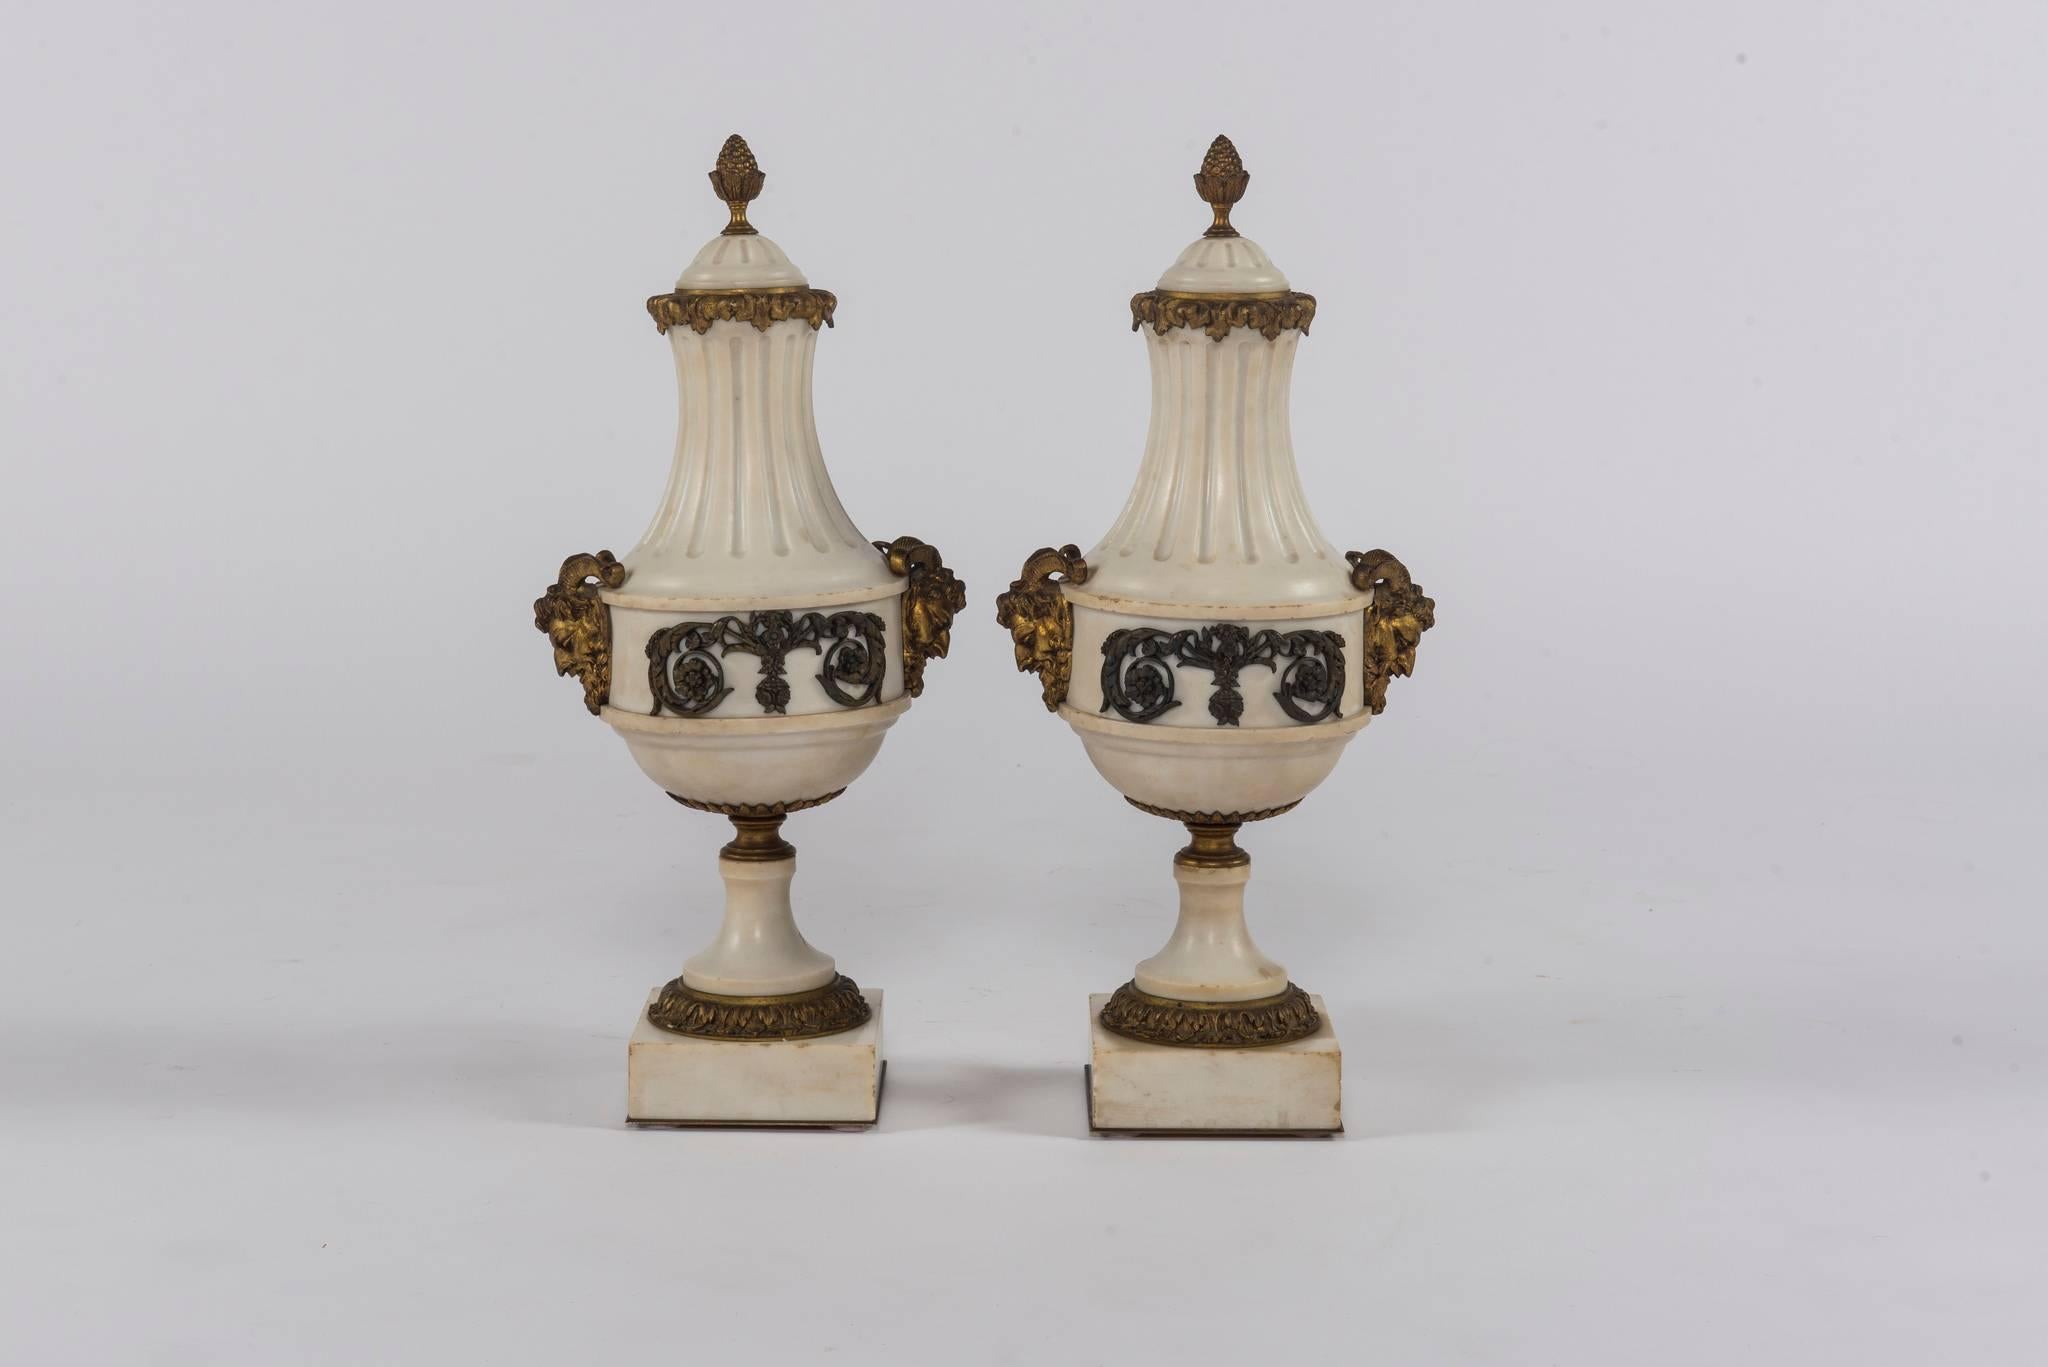 A pair of 20th century marble and bronze cassolettes featuring floral swags and satyr heads.